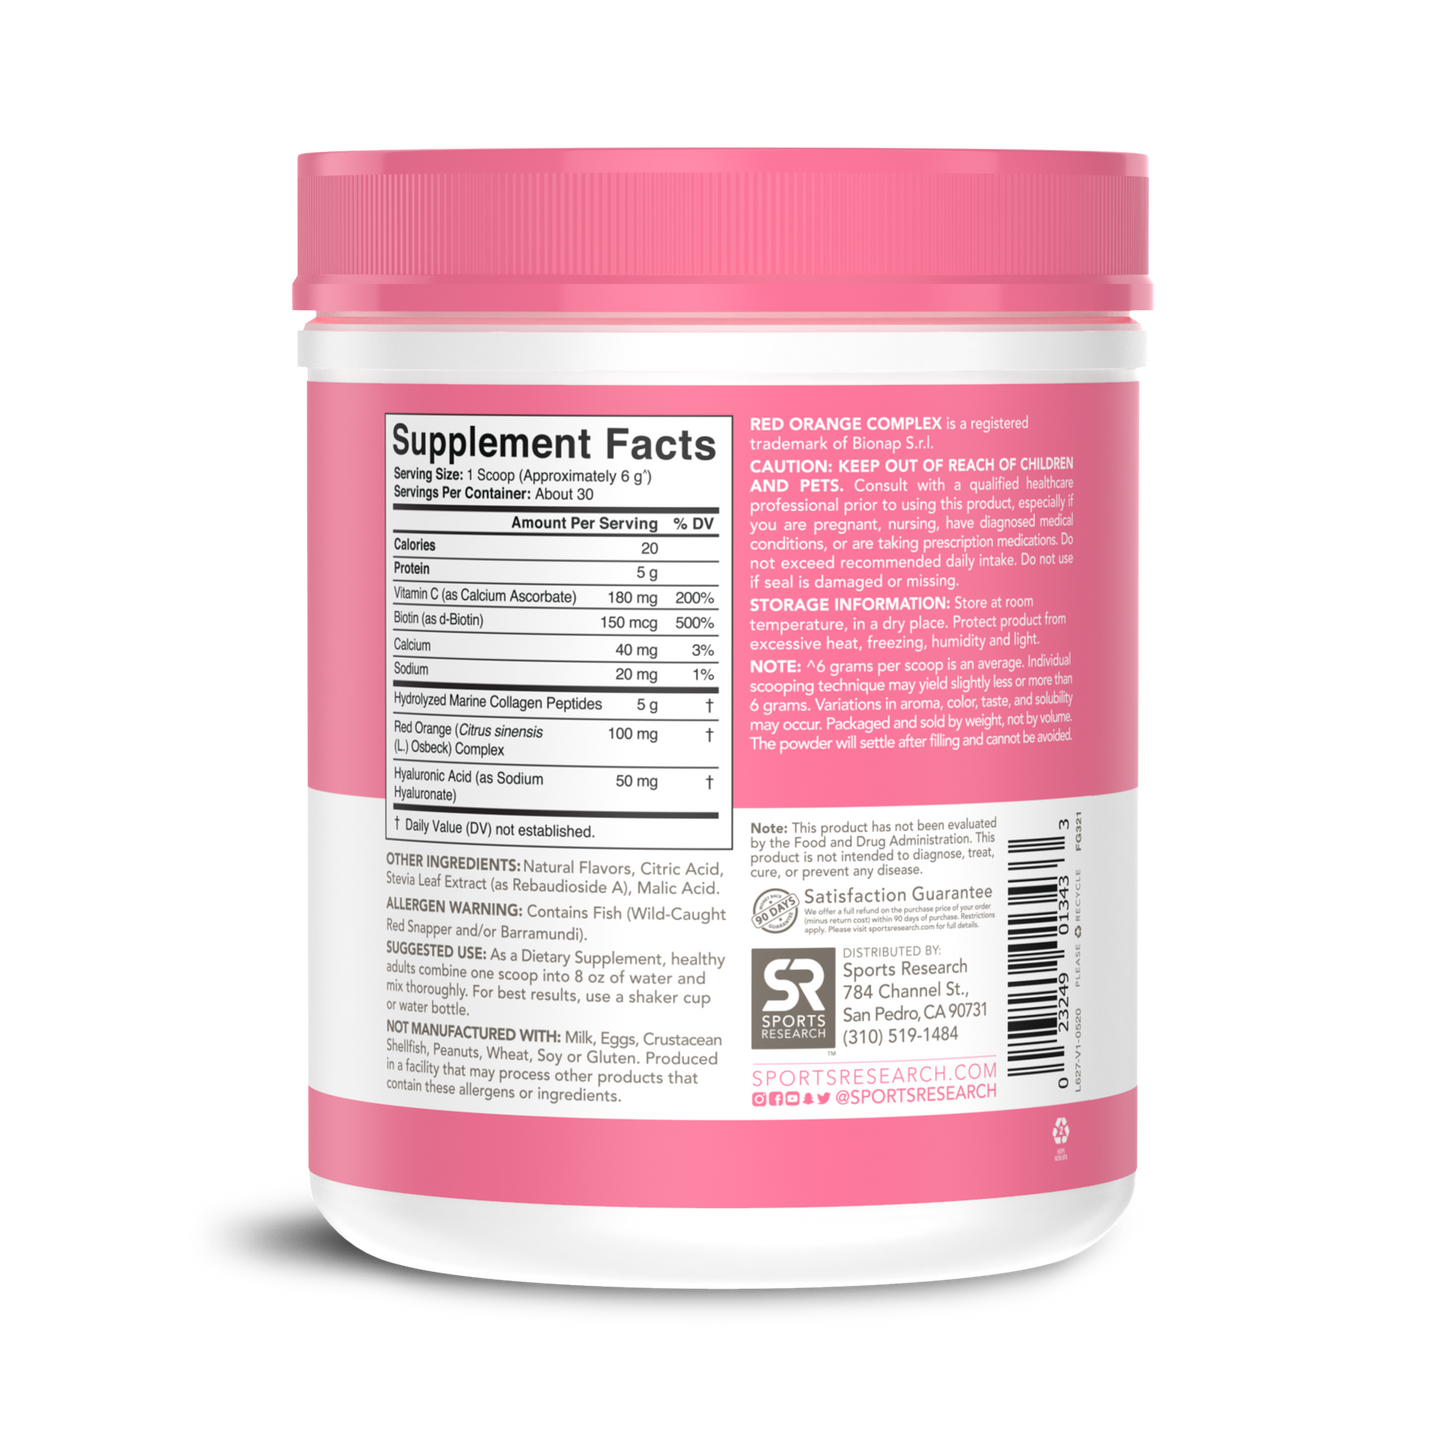 The back of a Marine Collagen Complex with Hyaluronic Acid powdered supplement made by Sports Research.